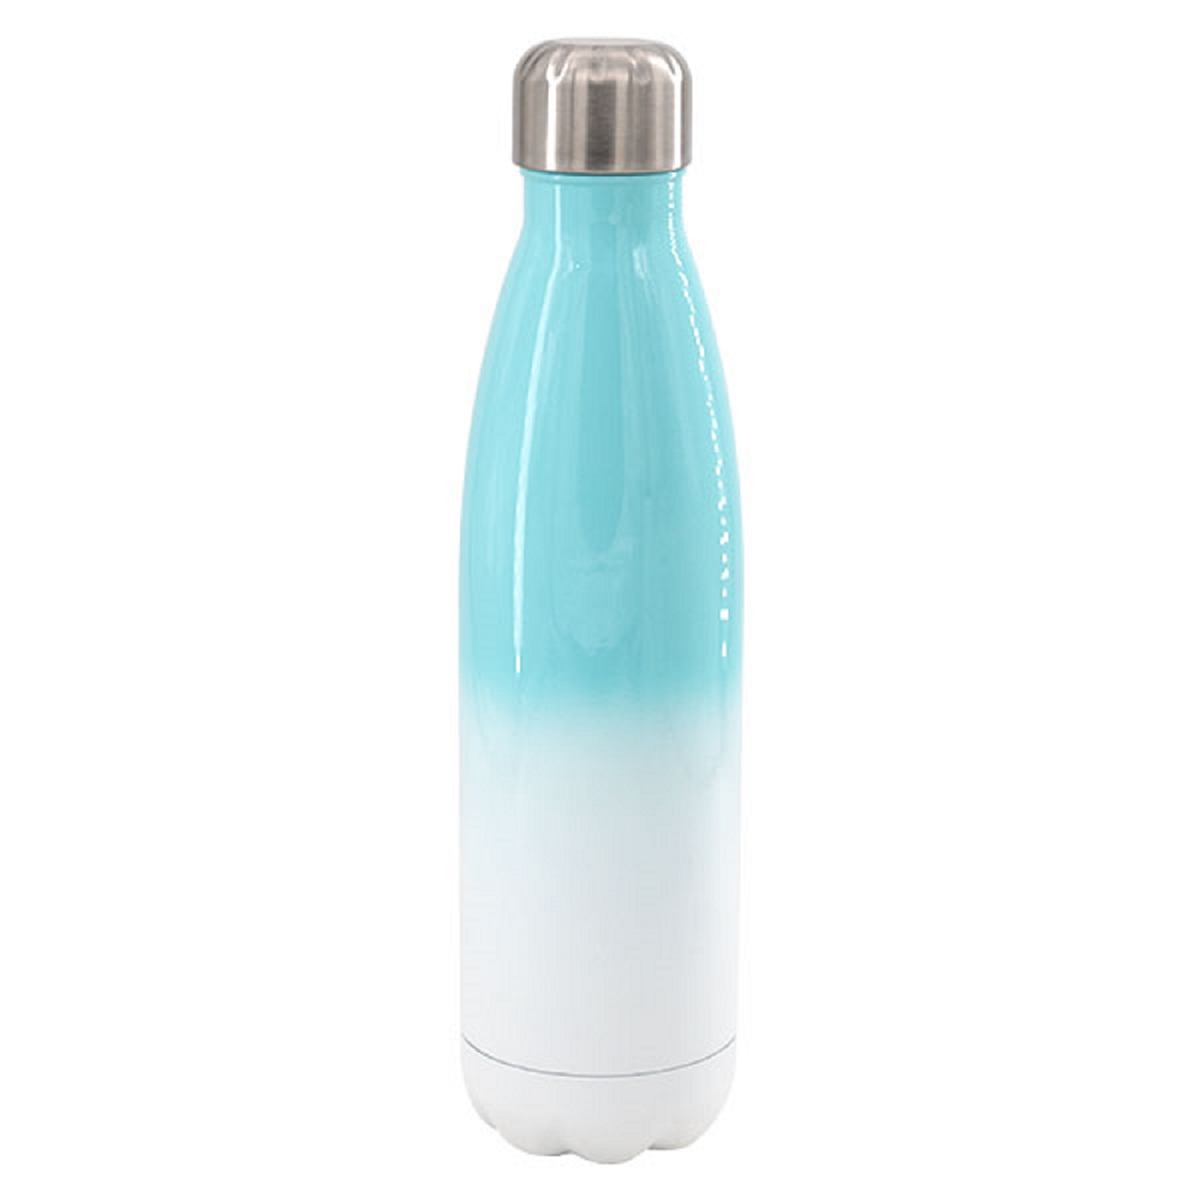 17 oz. Insulated Water Bottle - Light Blue Gradient - Orca